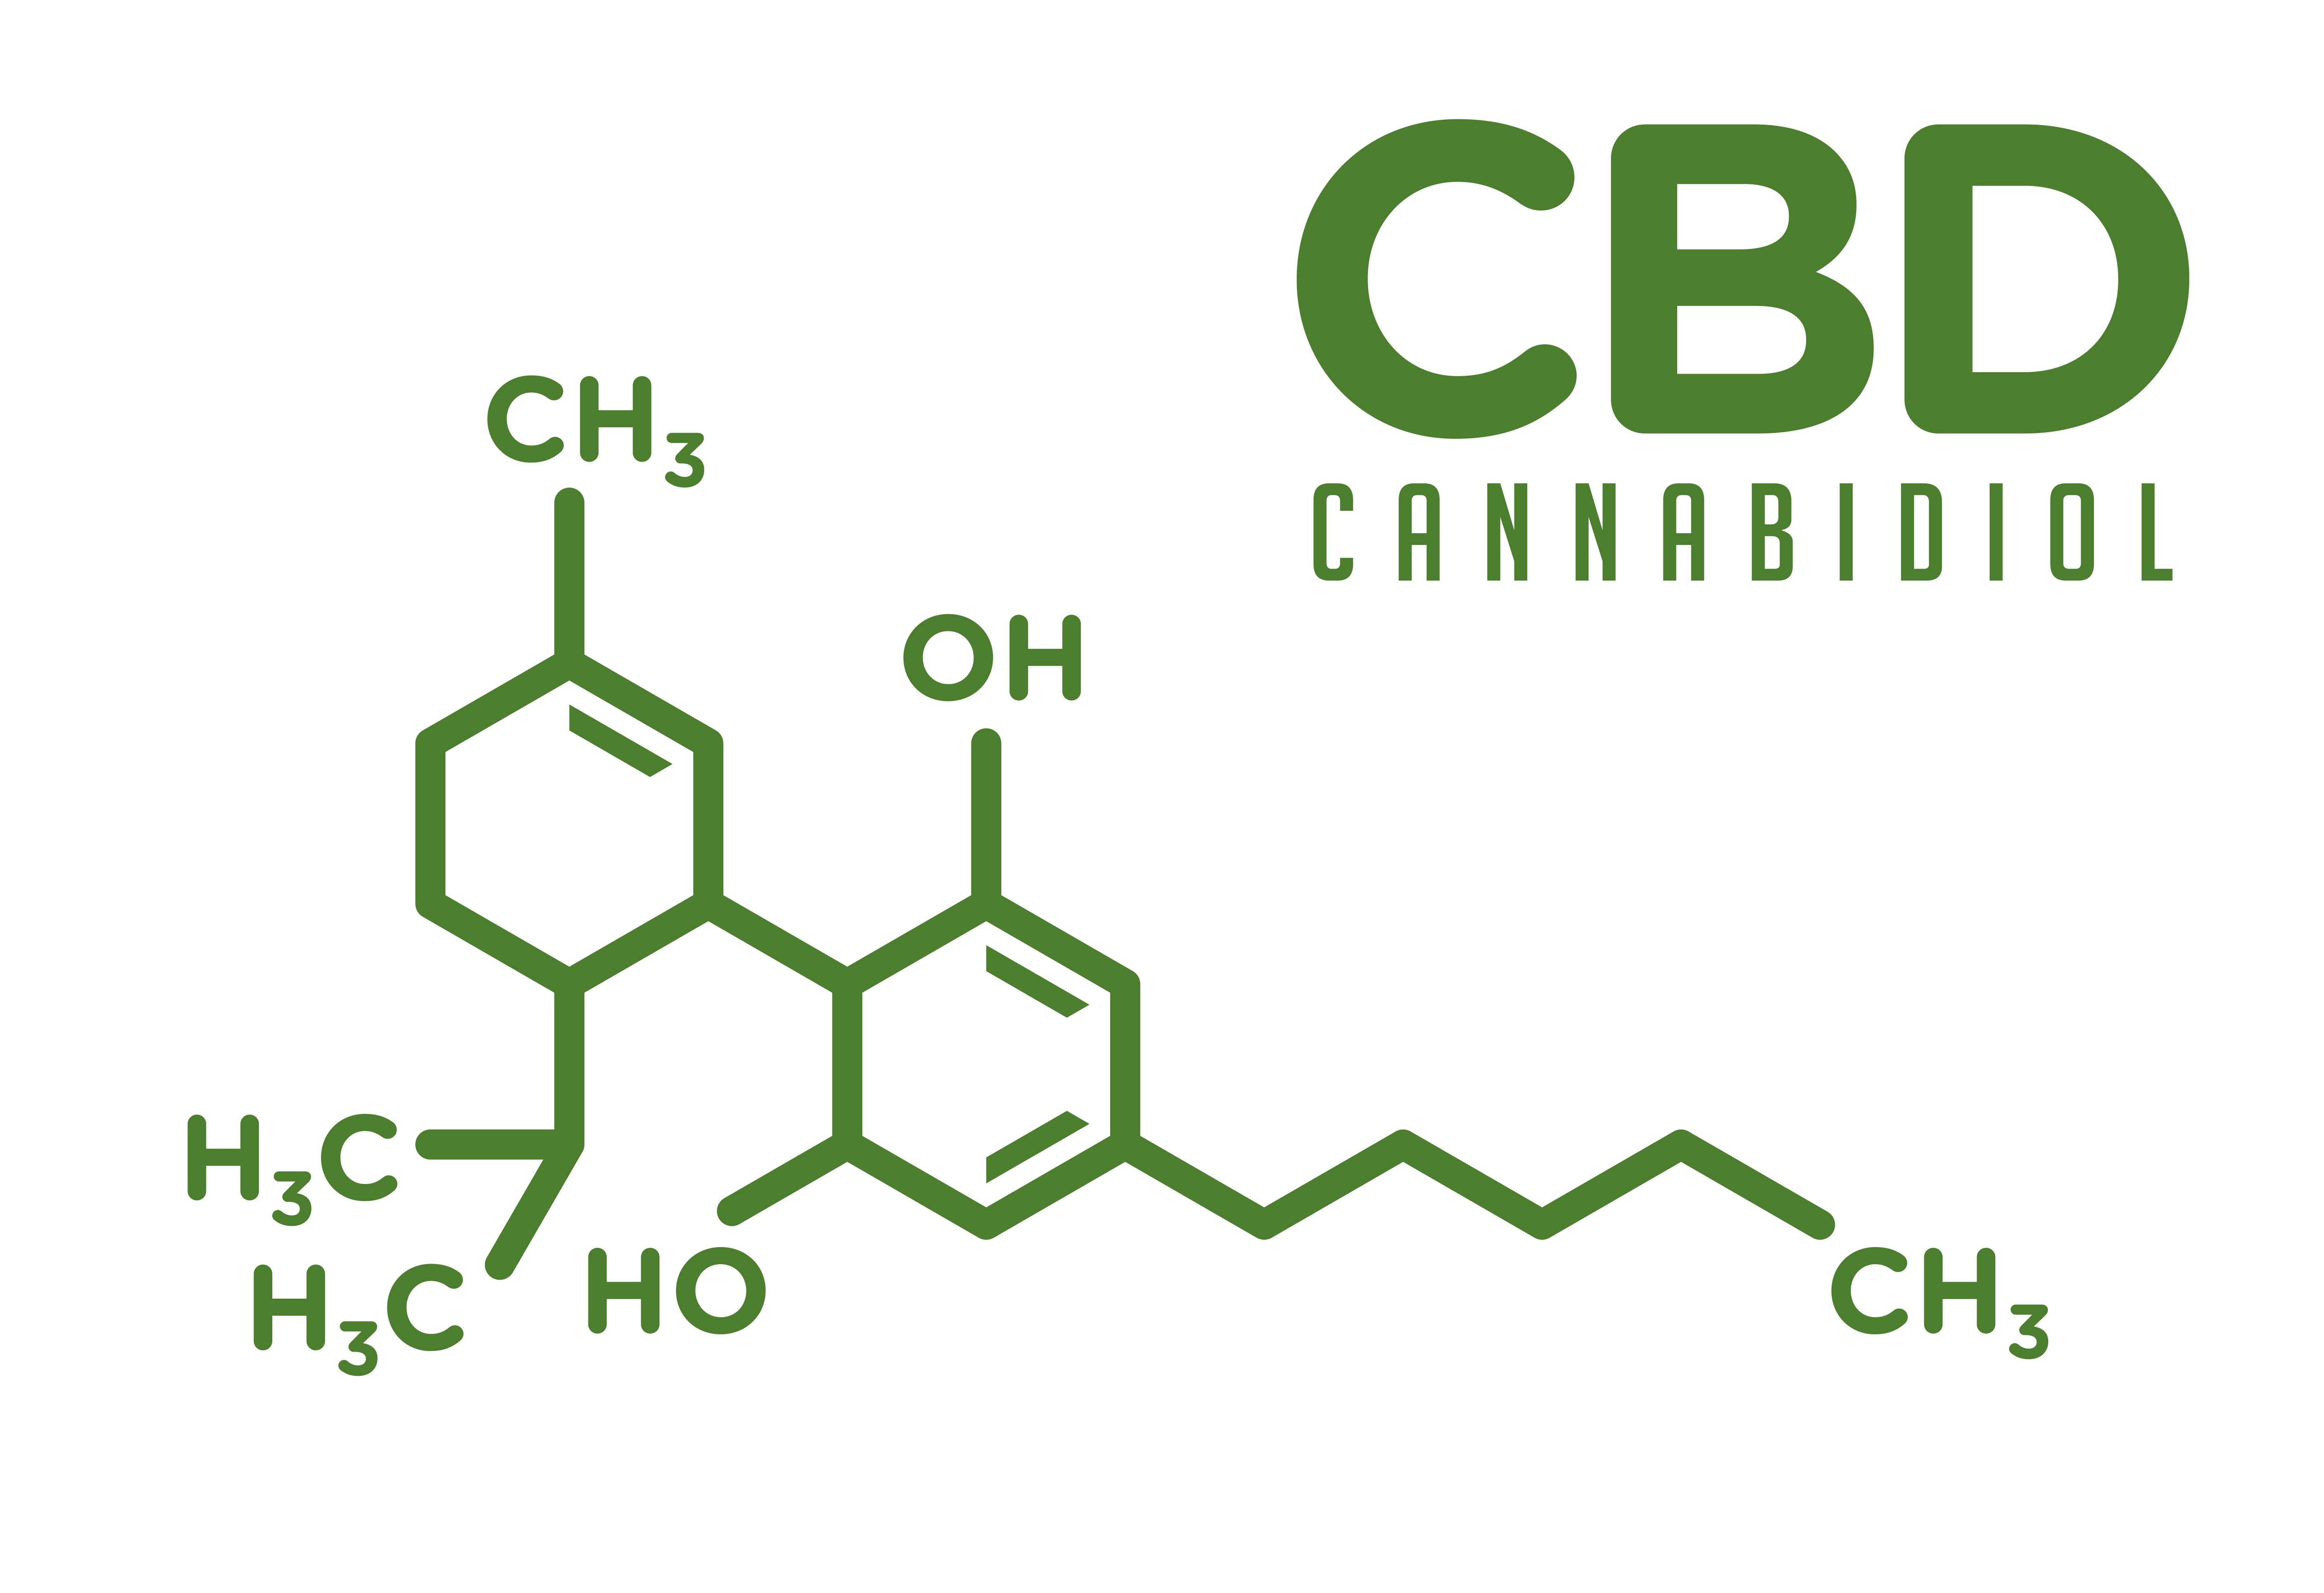 Understanding the challenges the CBD industry is still facing despite the enactment of the 2018 Farm Bill.